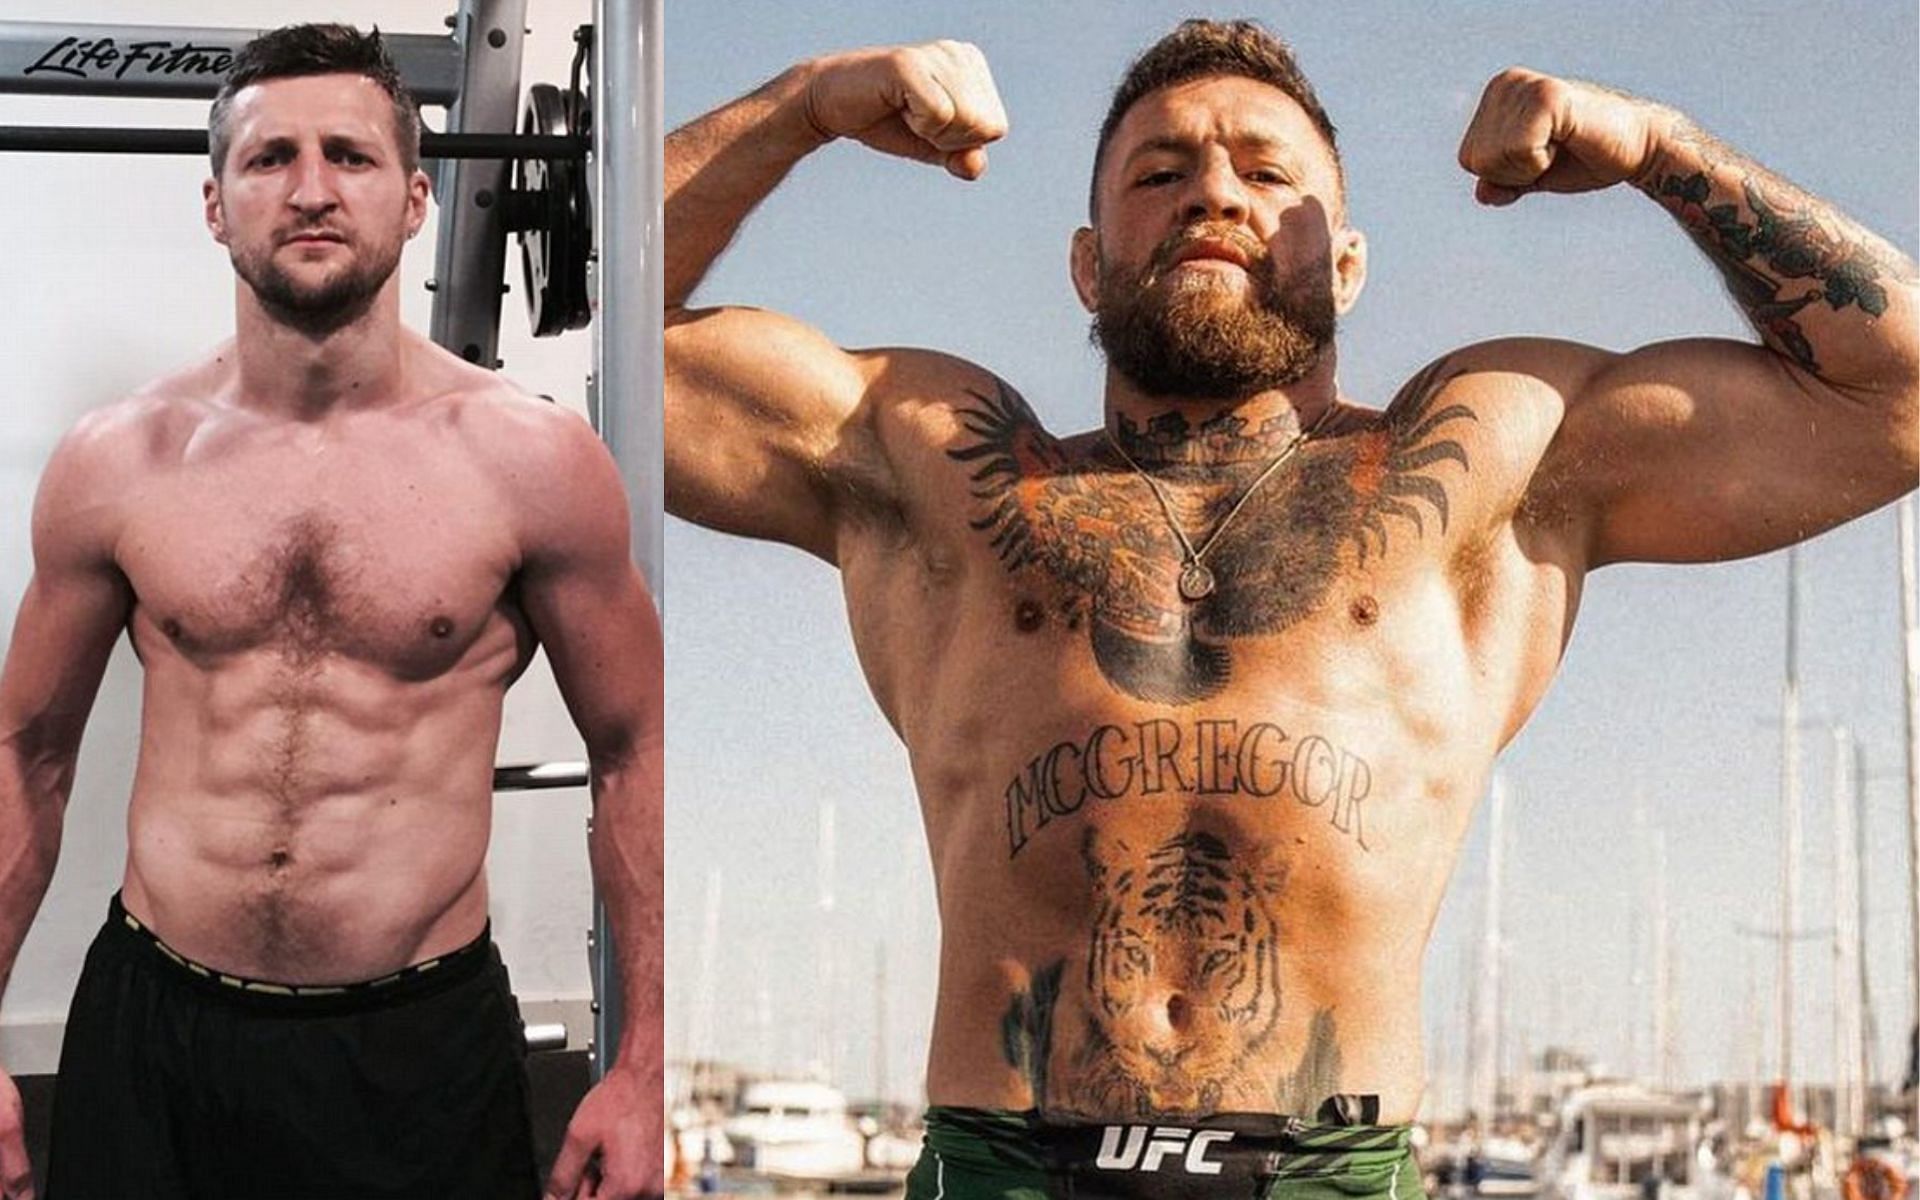 Carl Froch, Conor McGregor (Image Courtesy - Daily Mail, MARCA)